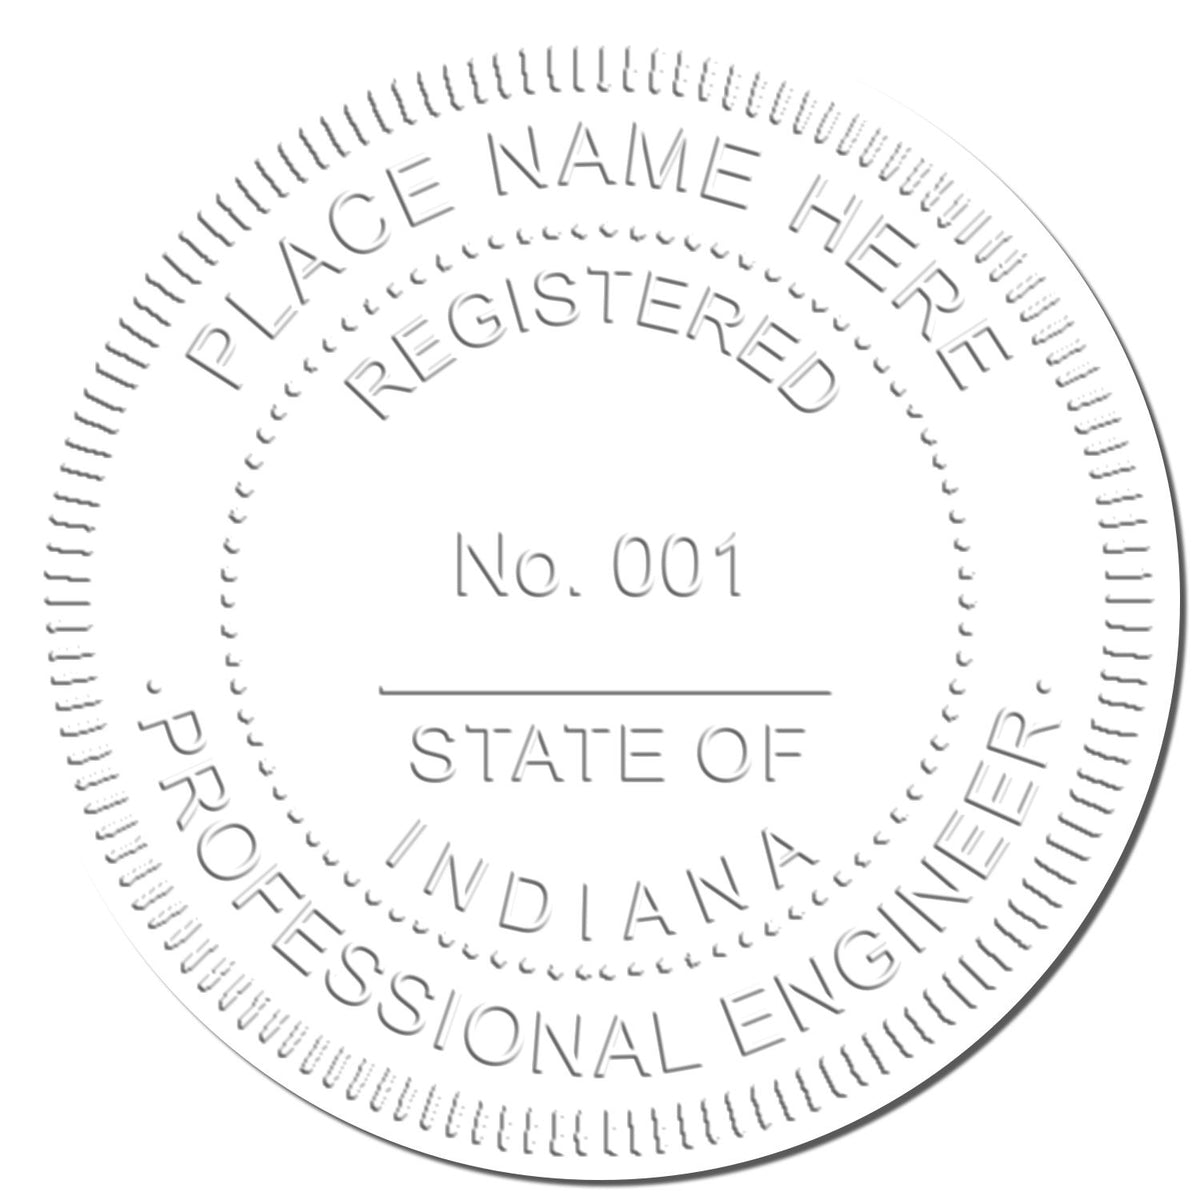 This paper is stamped with a sample imprint of the State of Indiana Extended Long Reach Engineer Seal, signifying its quality and reliability.